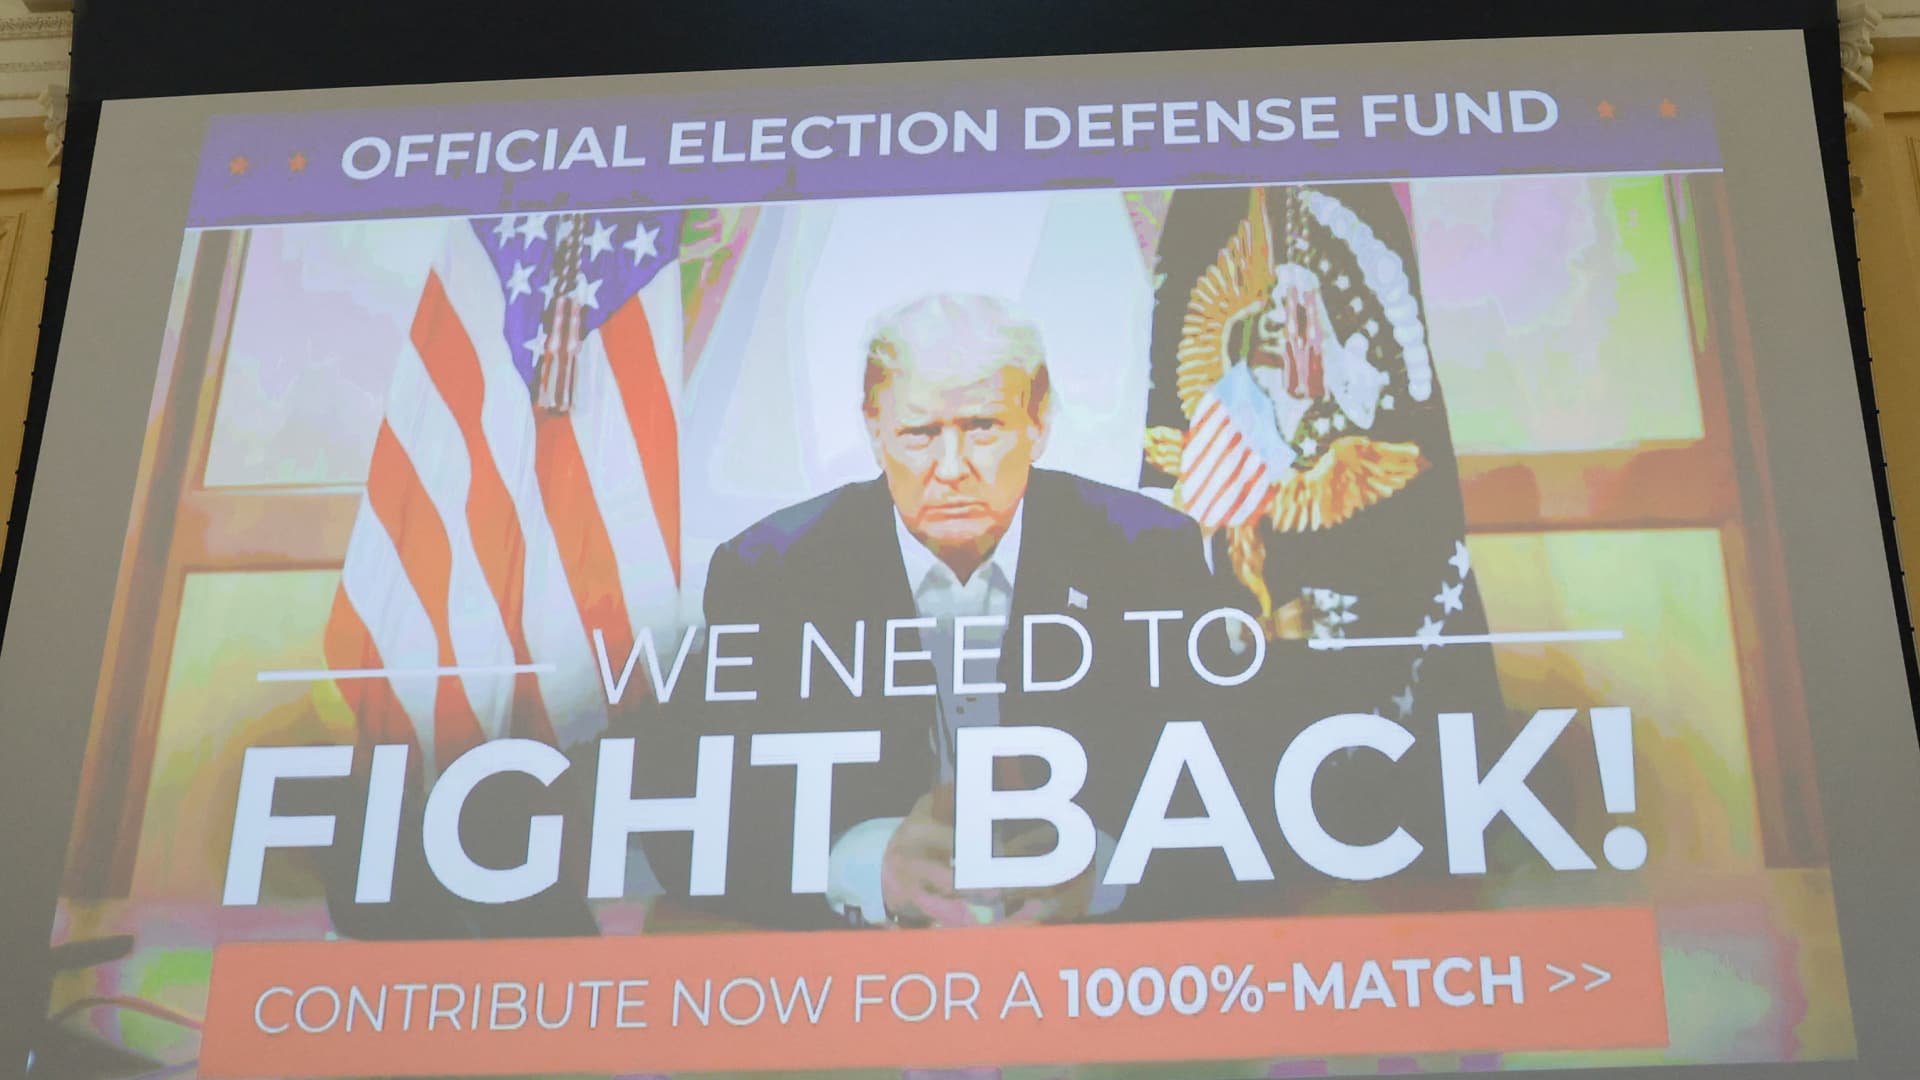 Campaign uses Facebook to fundraise